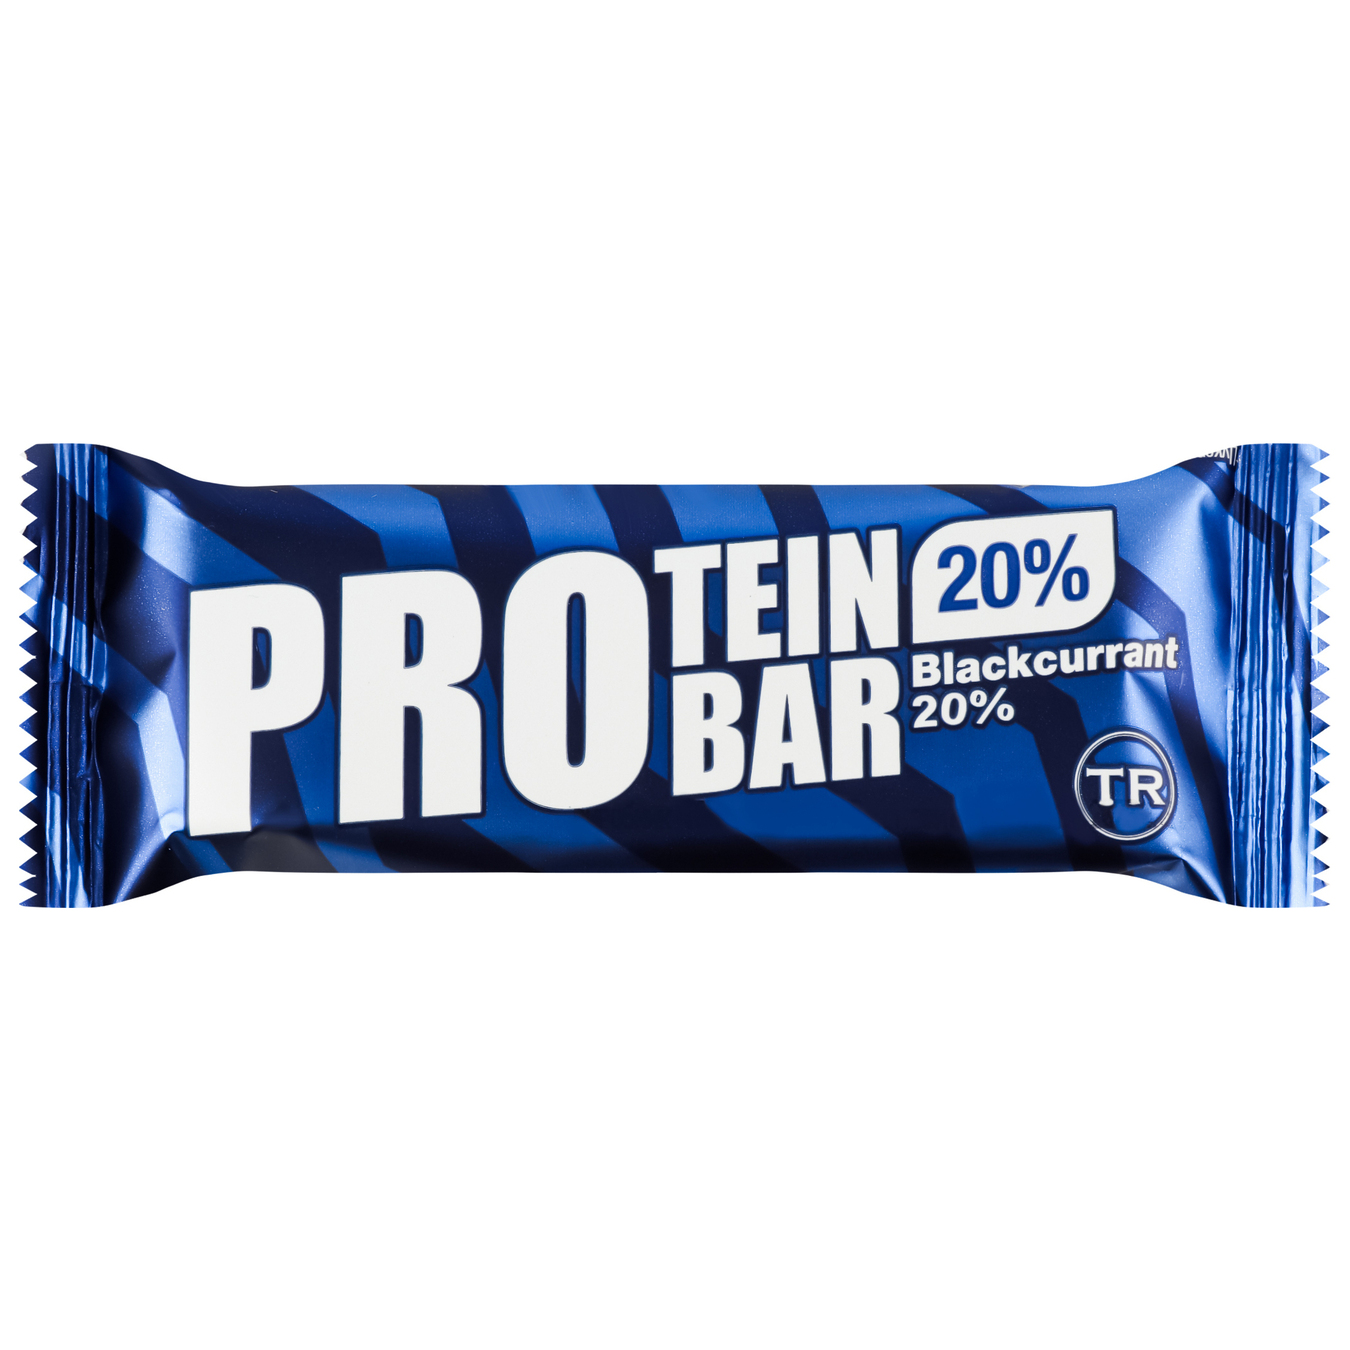 Candy glazed PROtein bar with black currant 30g